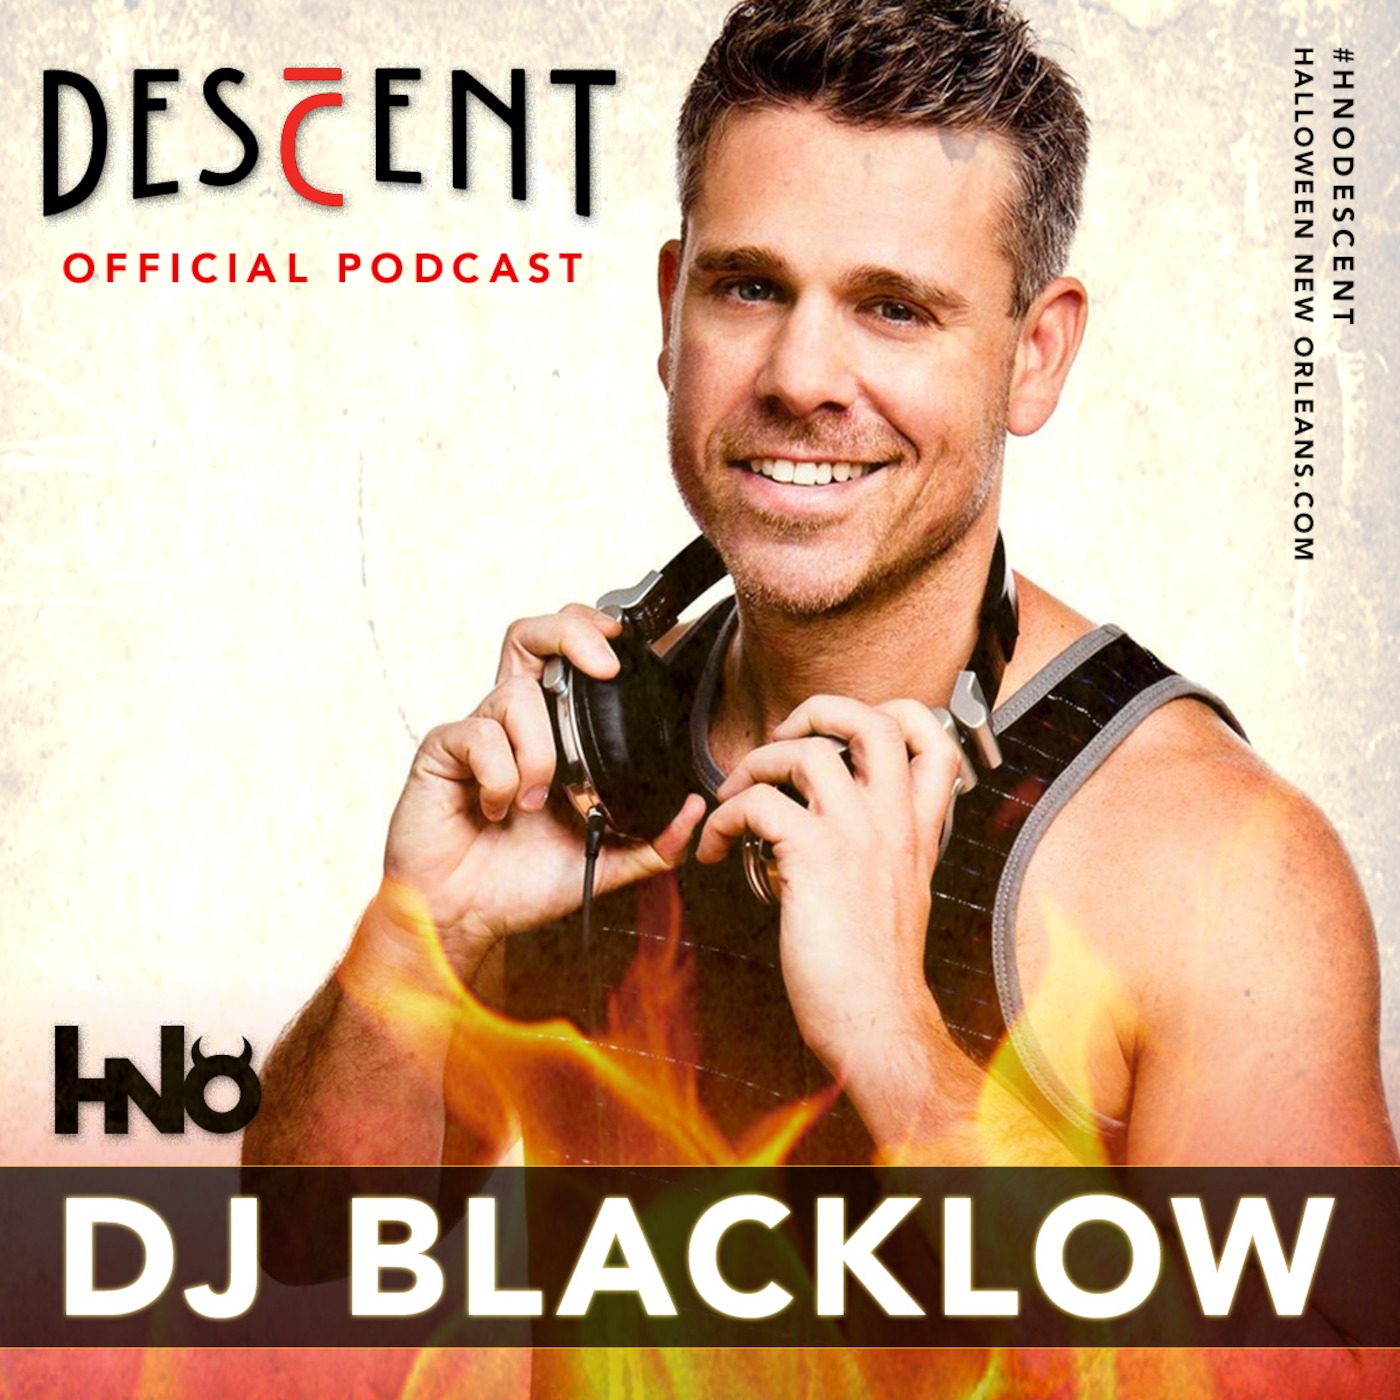 DESCENT: The Official Podcast of Halloween New Orleans 2014